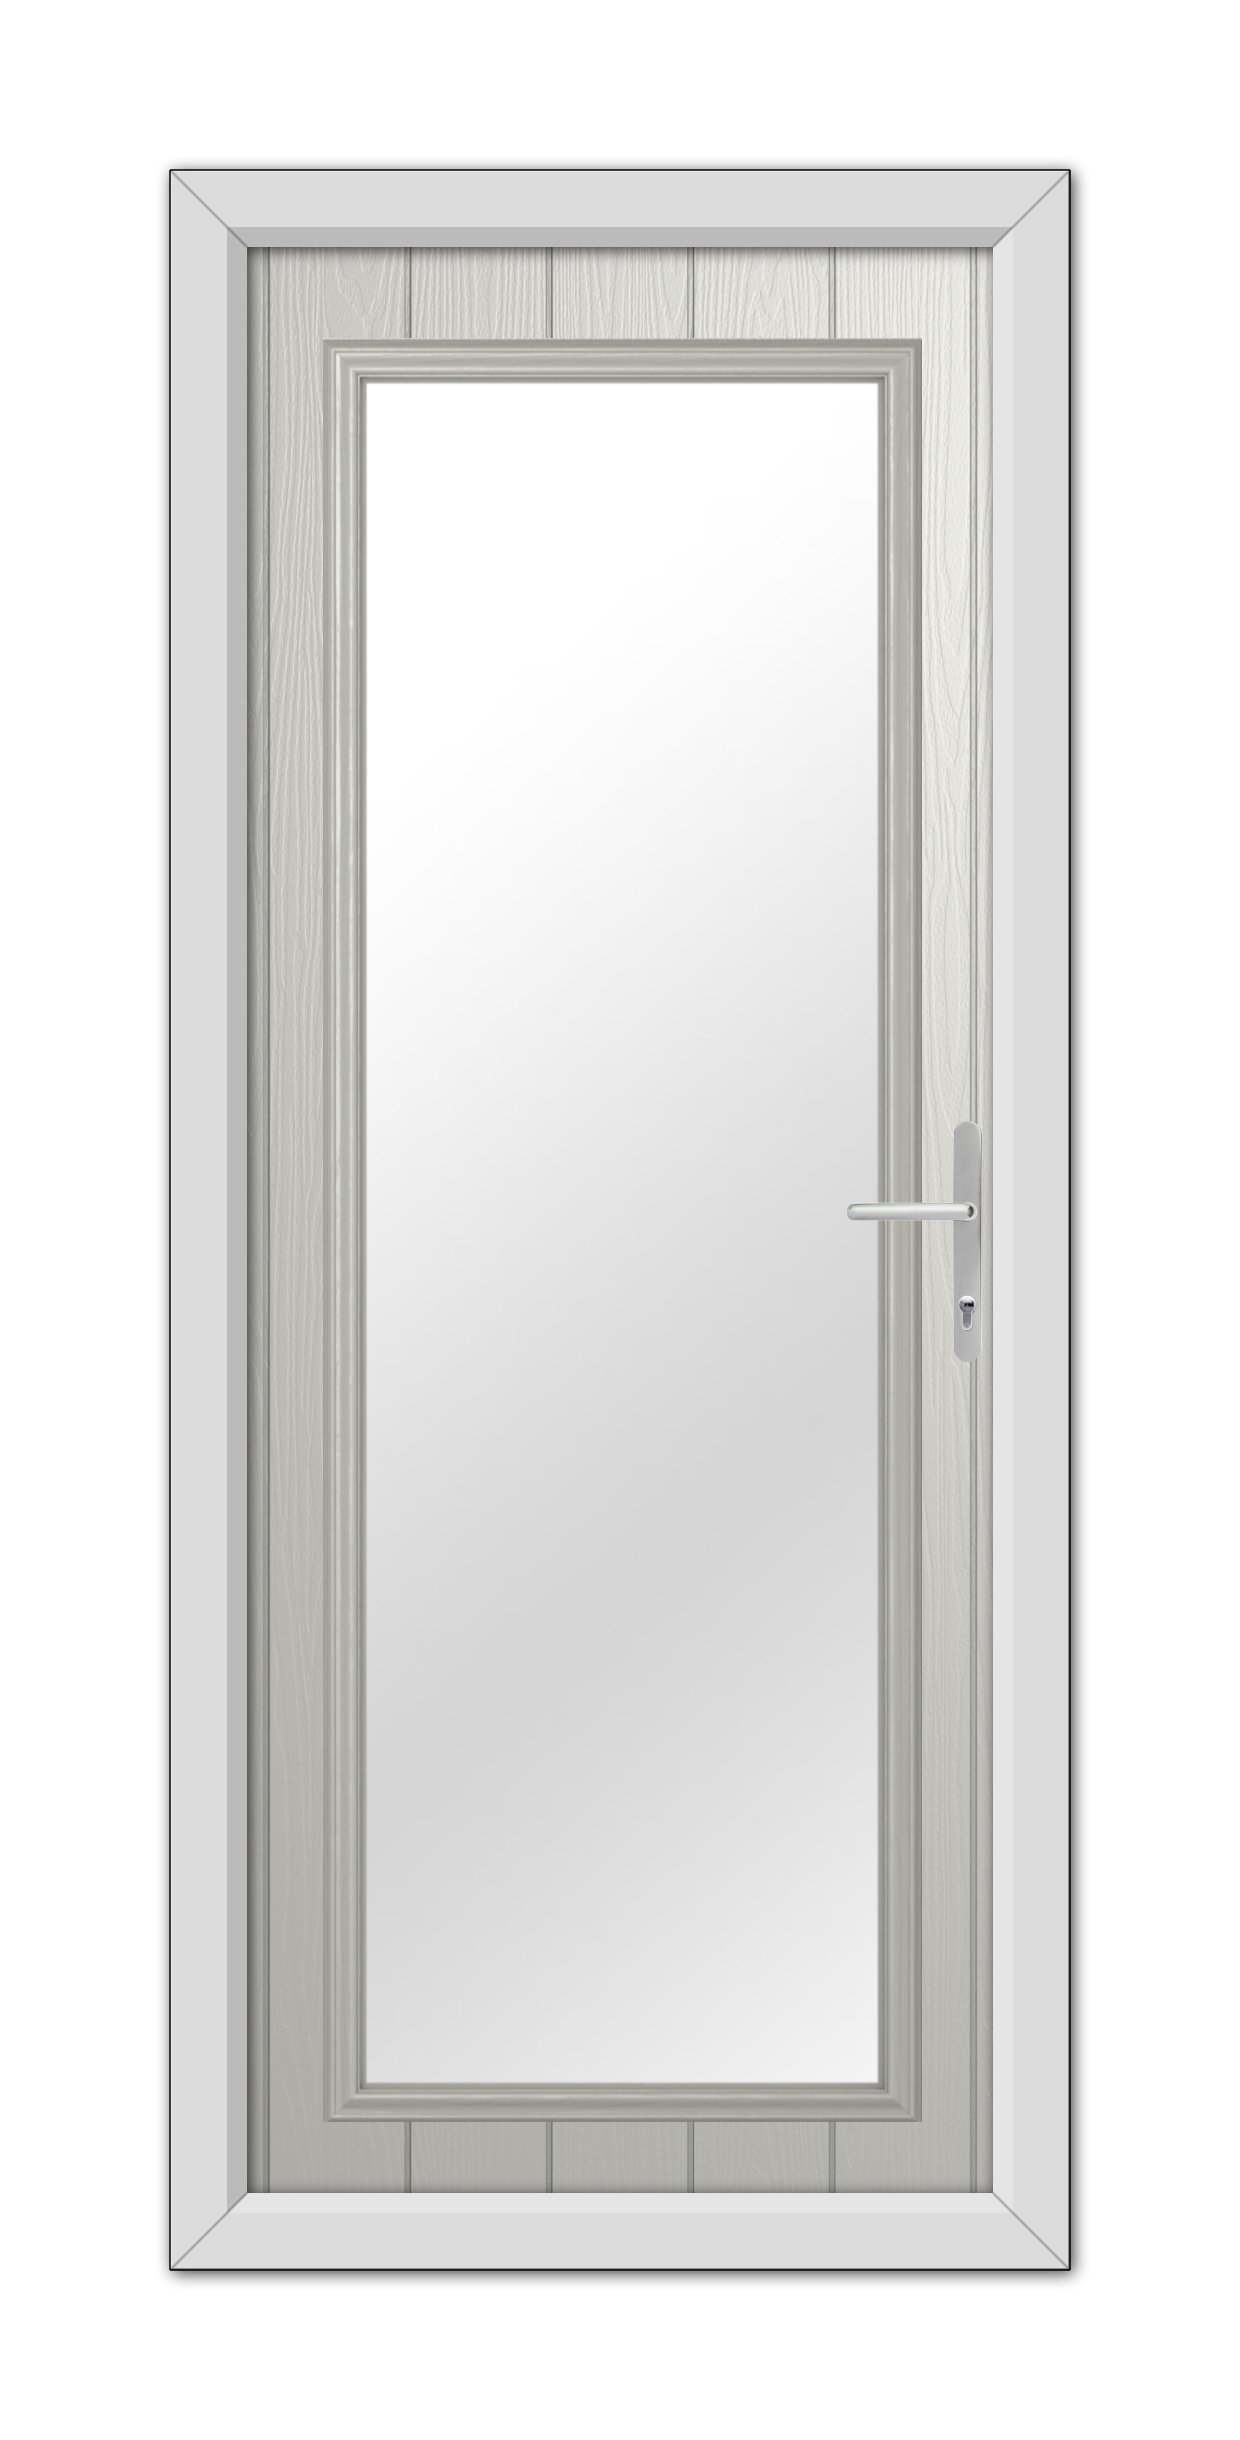 A modern Agate Grey Hatton Composite Door 48mm Timber Core with a clear rectangular glass panel, framed in white, and equipped with a silver handle on the right side.